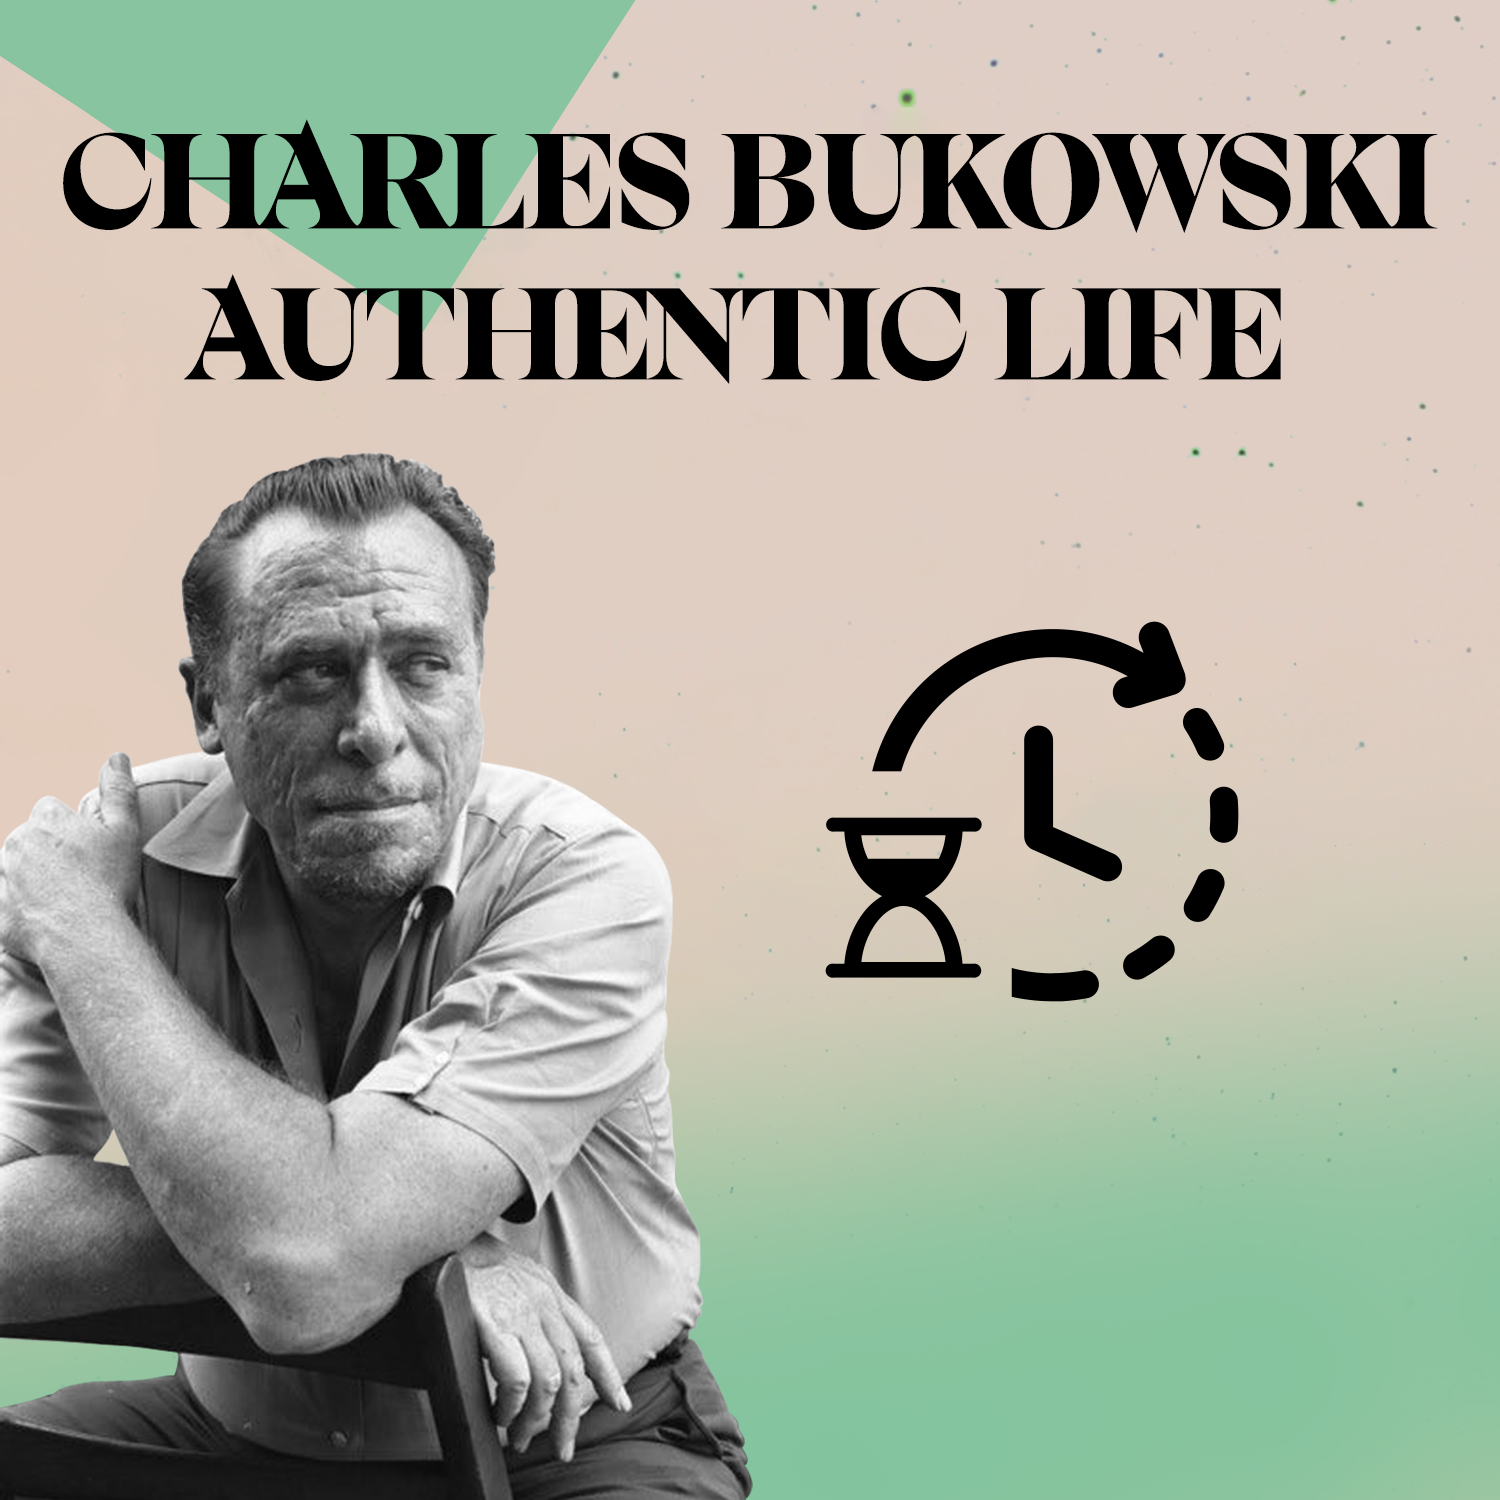 Charles Bukowski: Life Lessons and Insights From Poems to Live  Authentically — Play For Thoughts